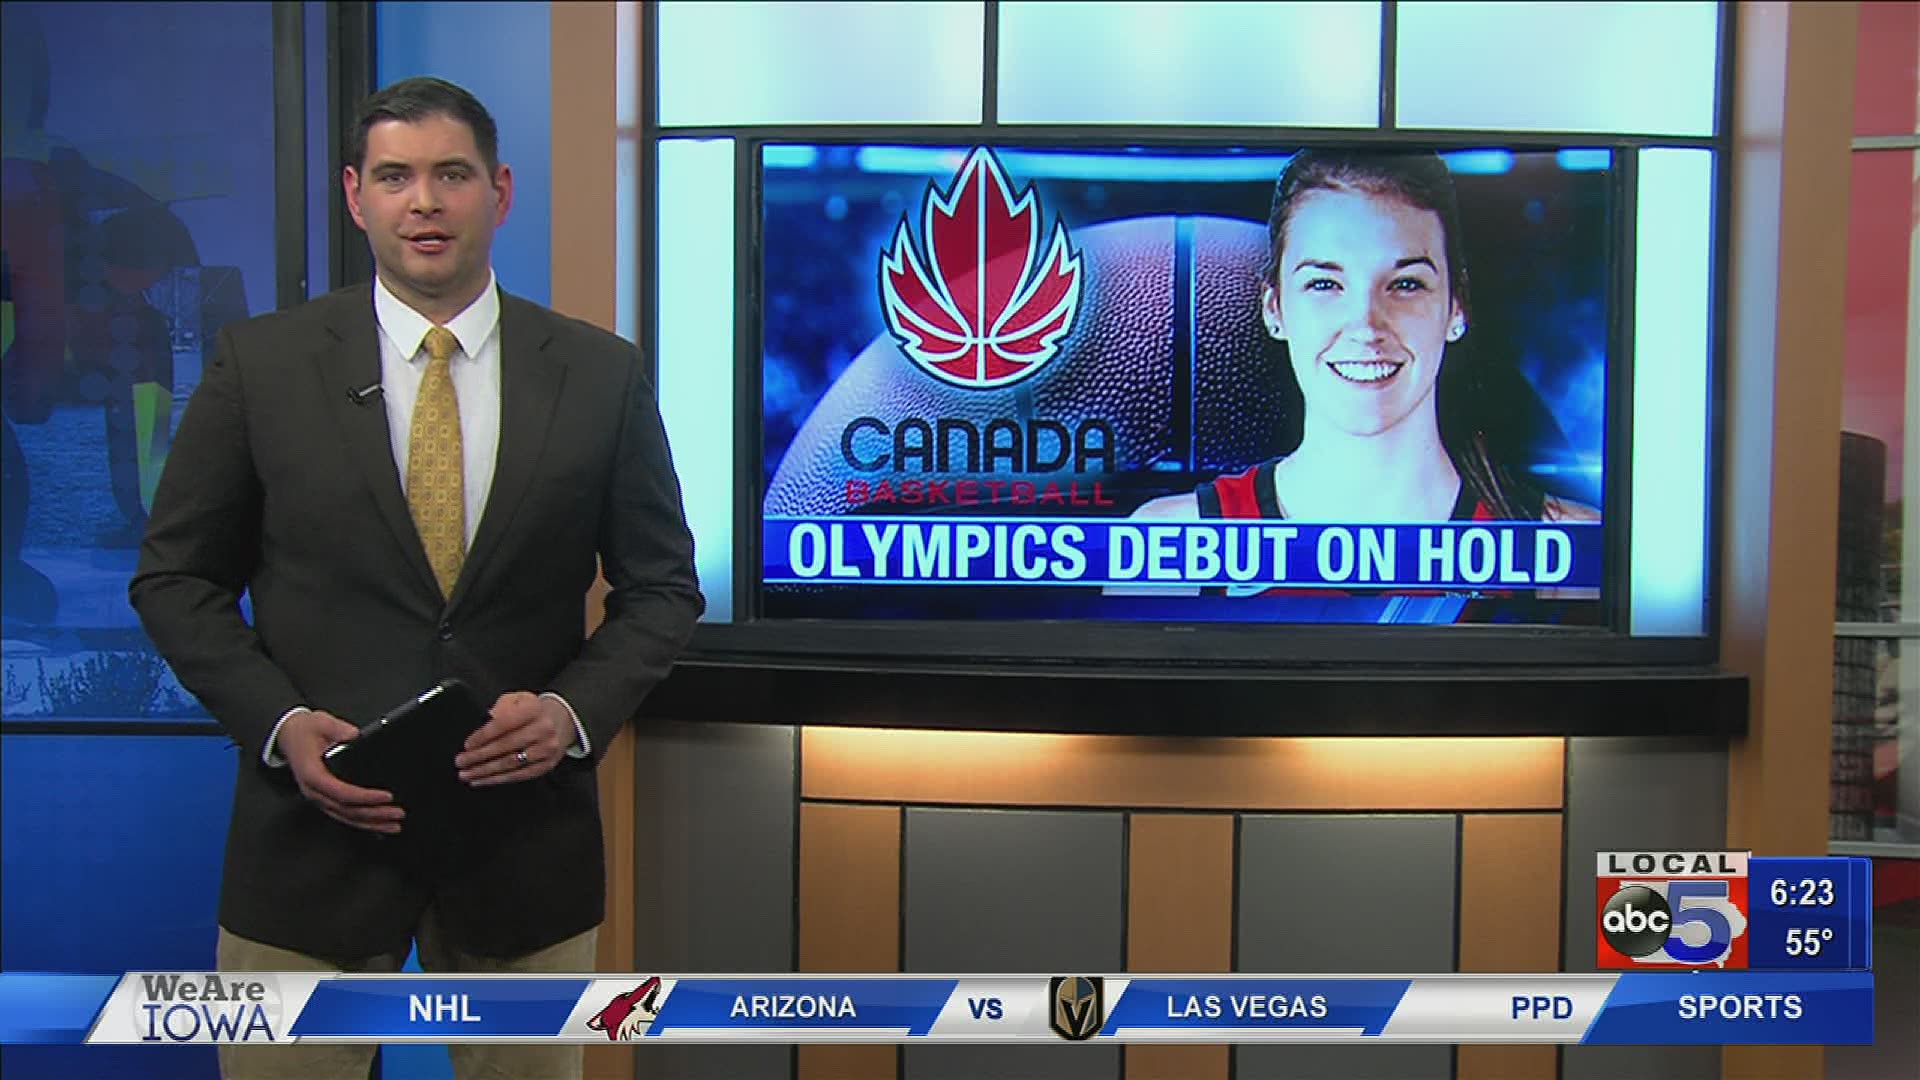 Bridget Carleton's dream of playing for Team Canada in the 2020 Olympics is on hold. She is fine with waiting until 2021.